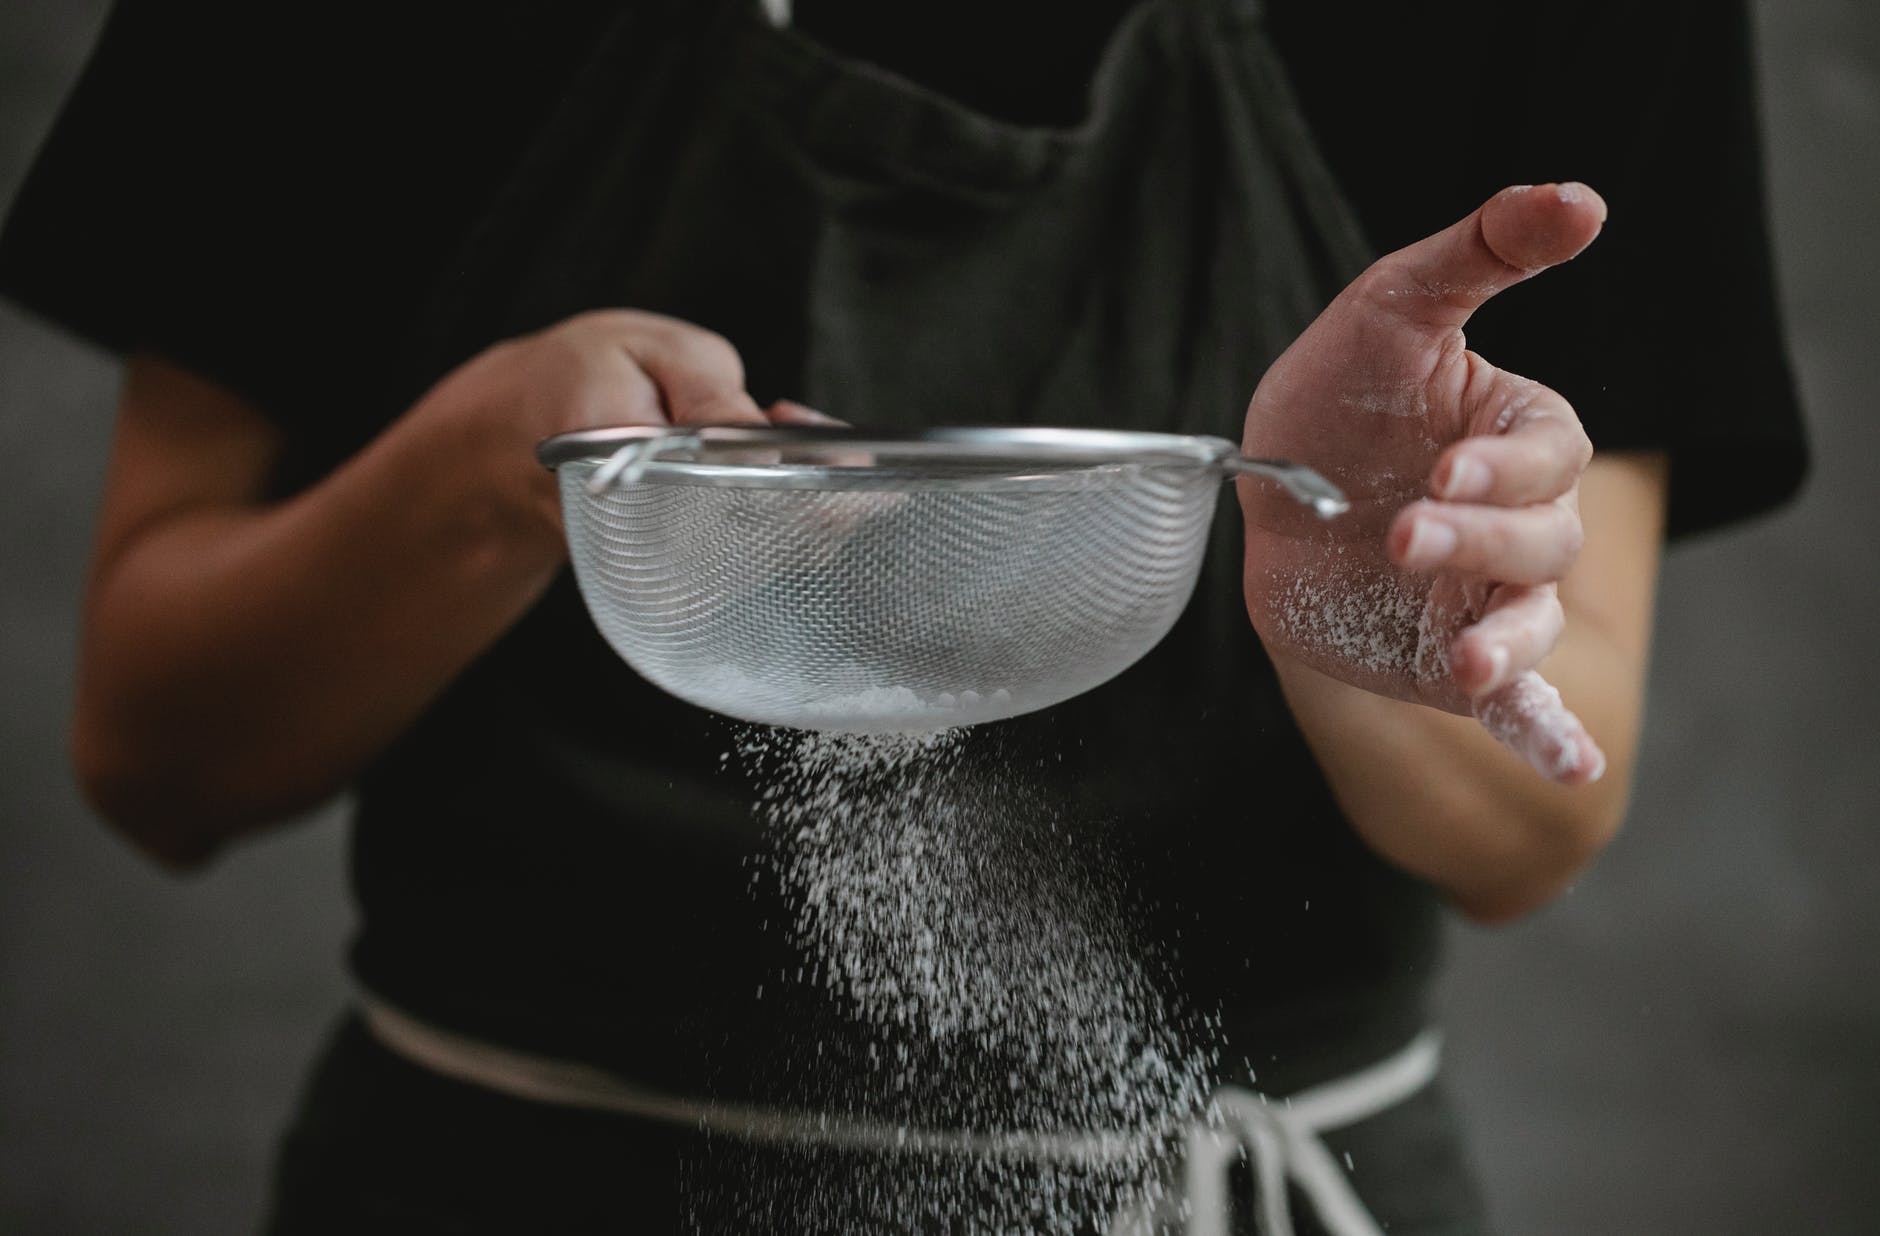 person pouring flour from sieve in kitchen